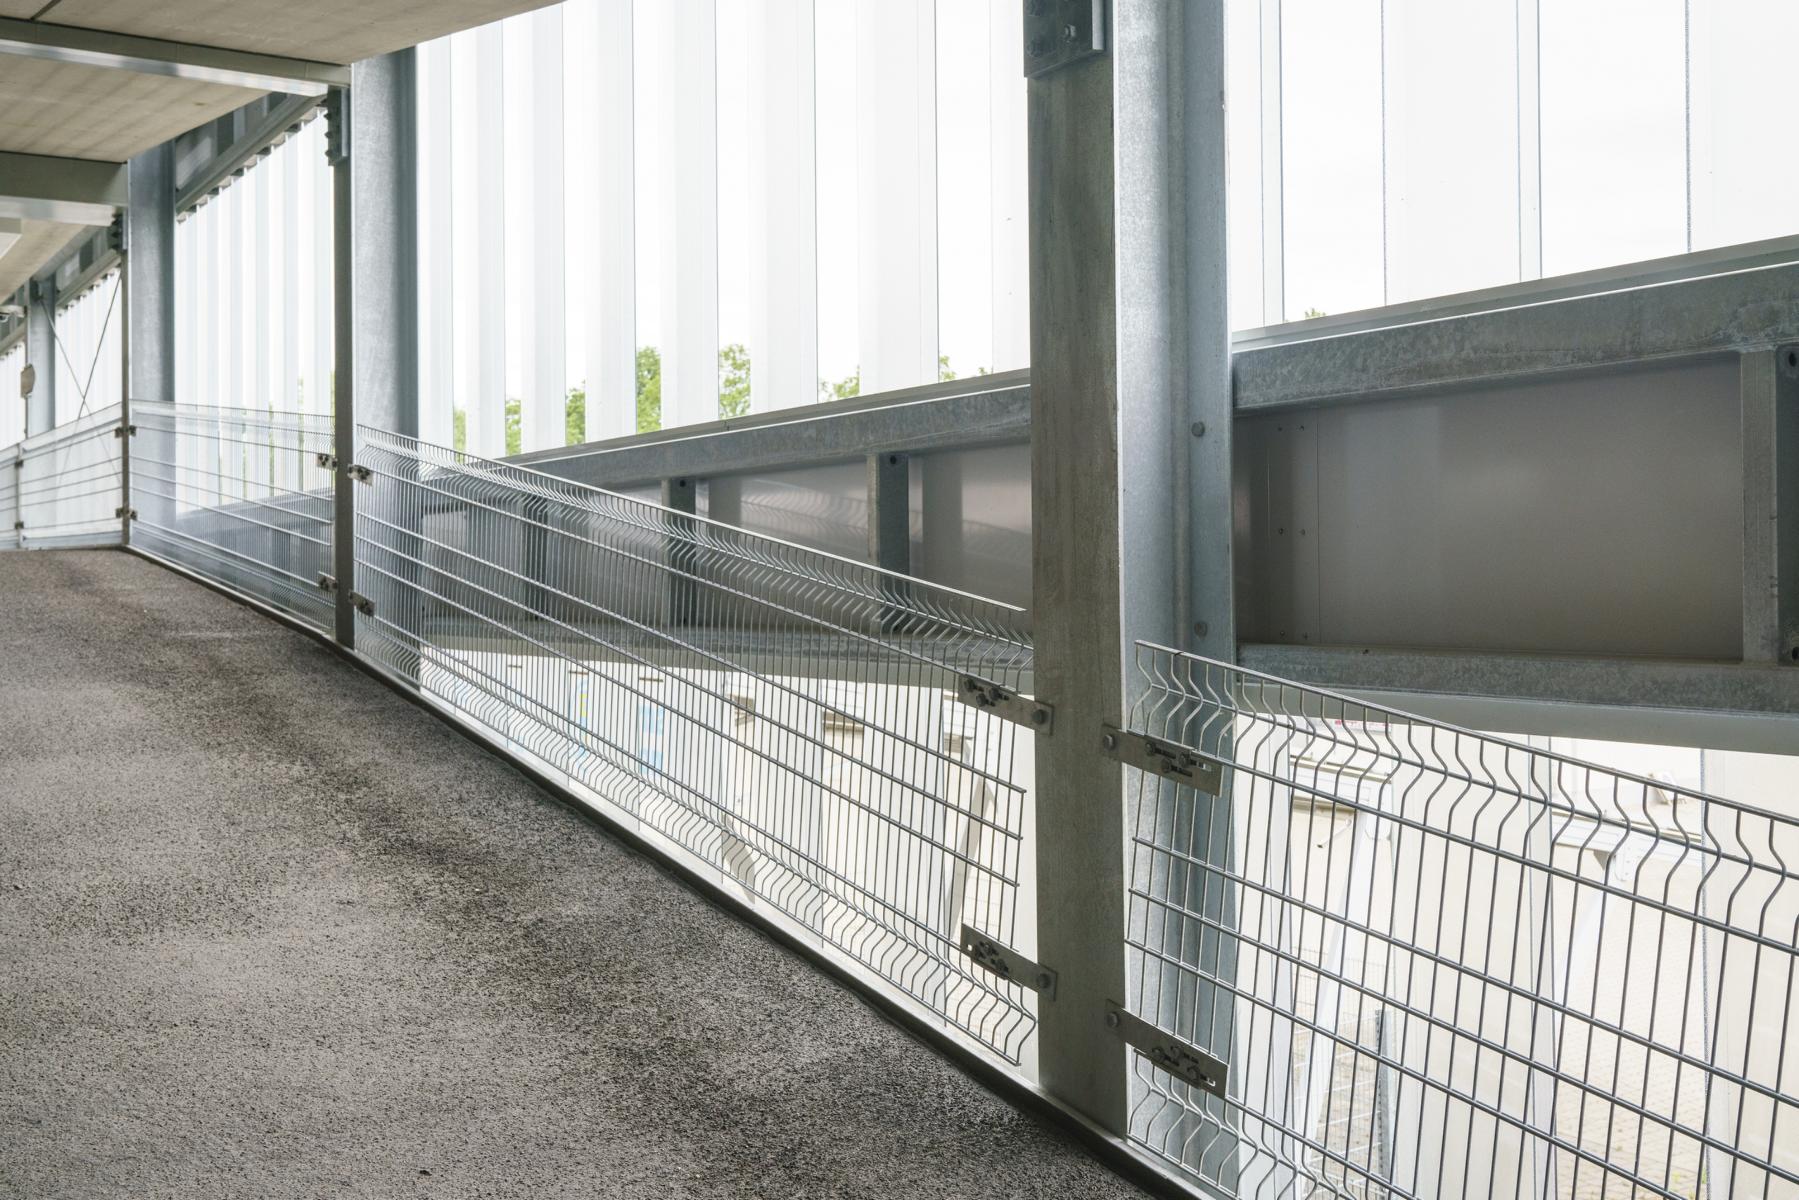 projekt w has expanded its portfolio of grid-based safety barrier 